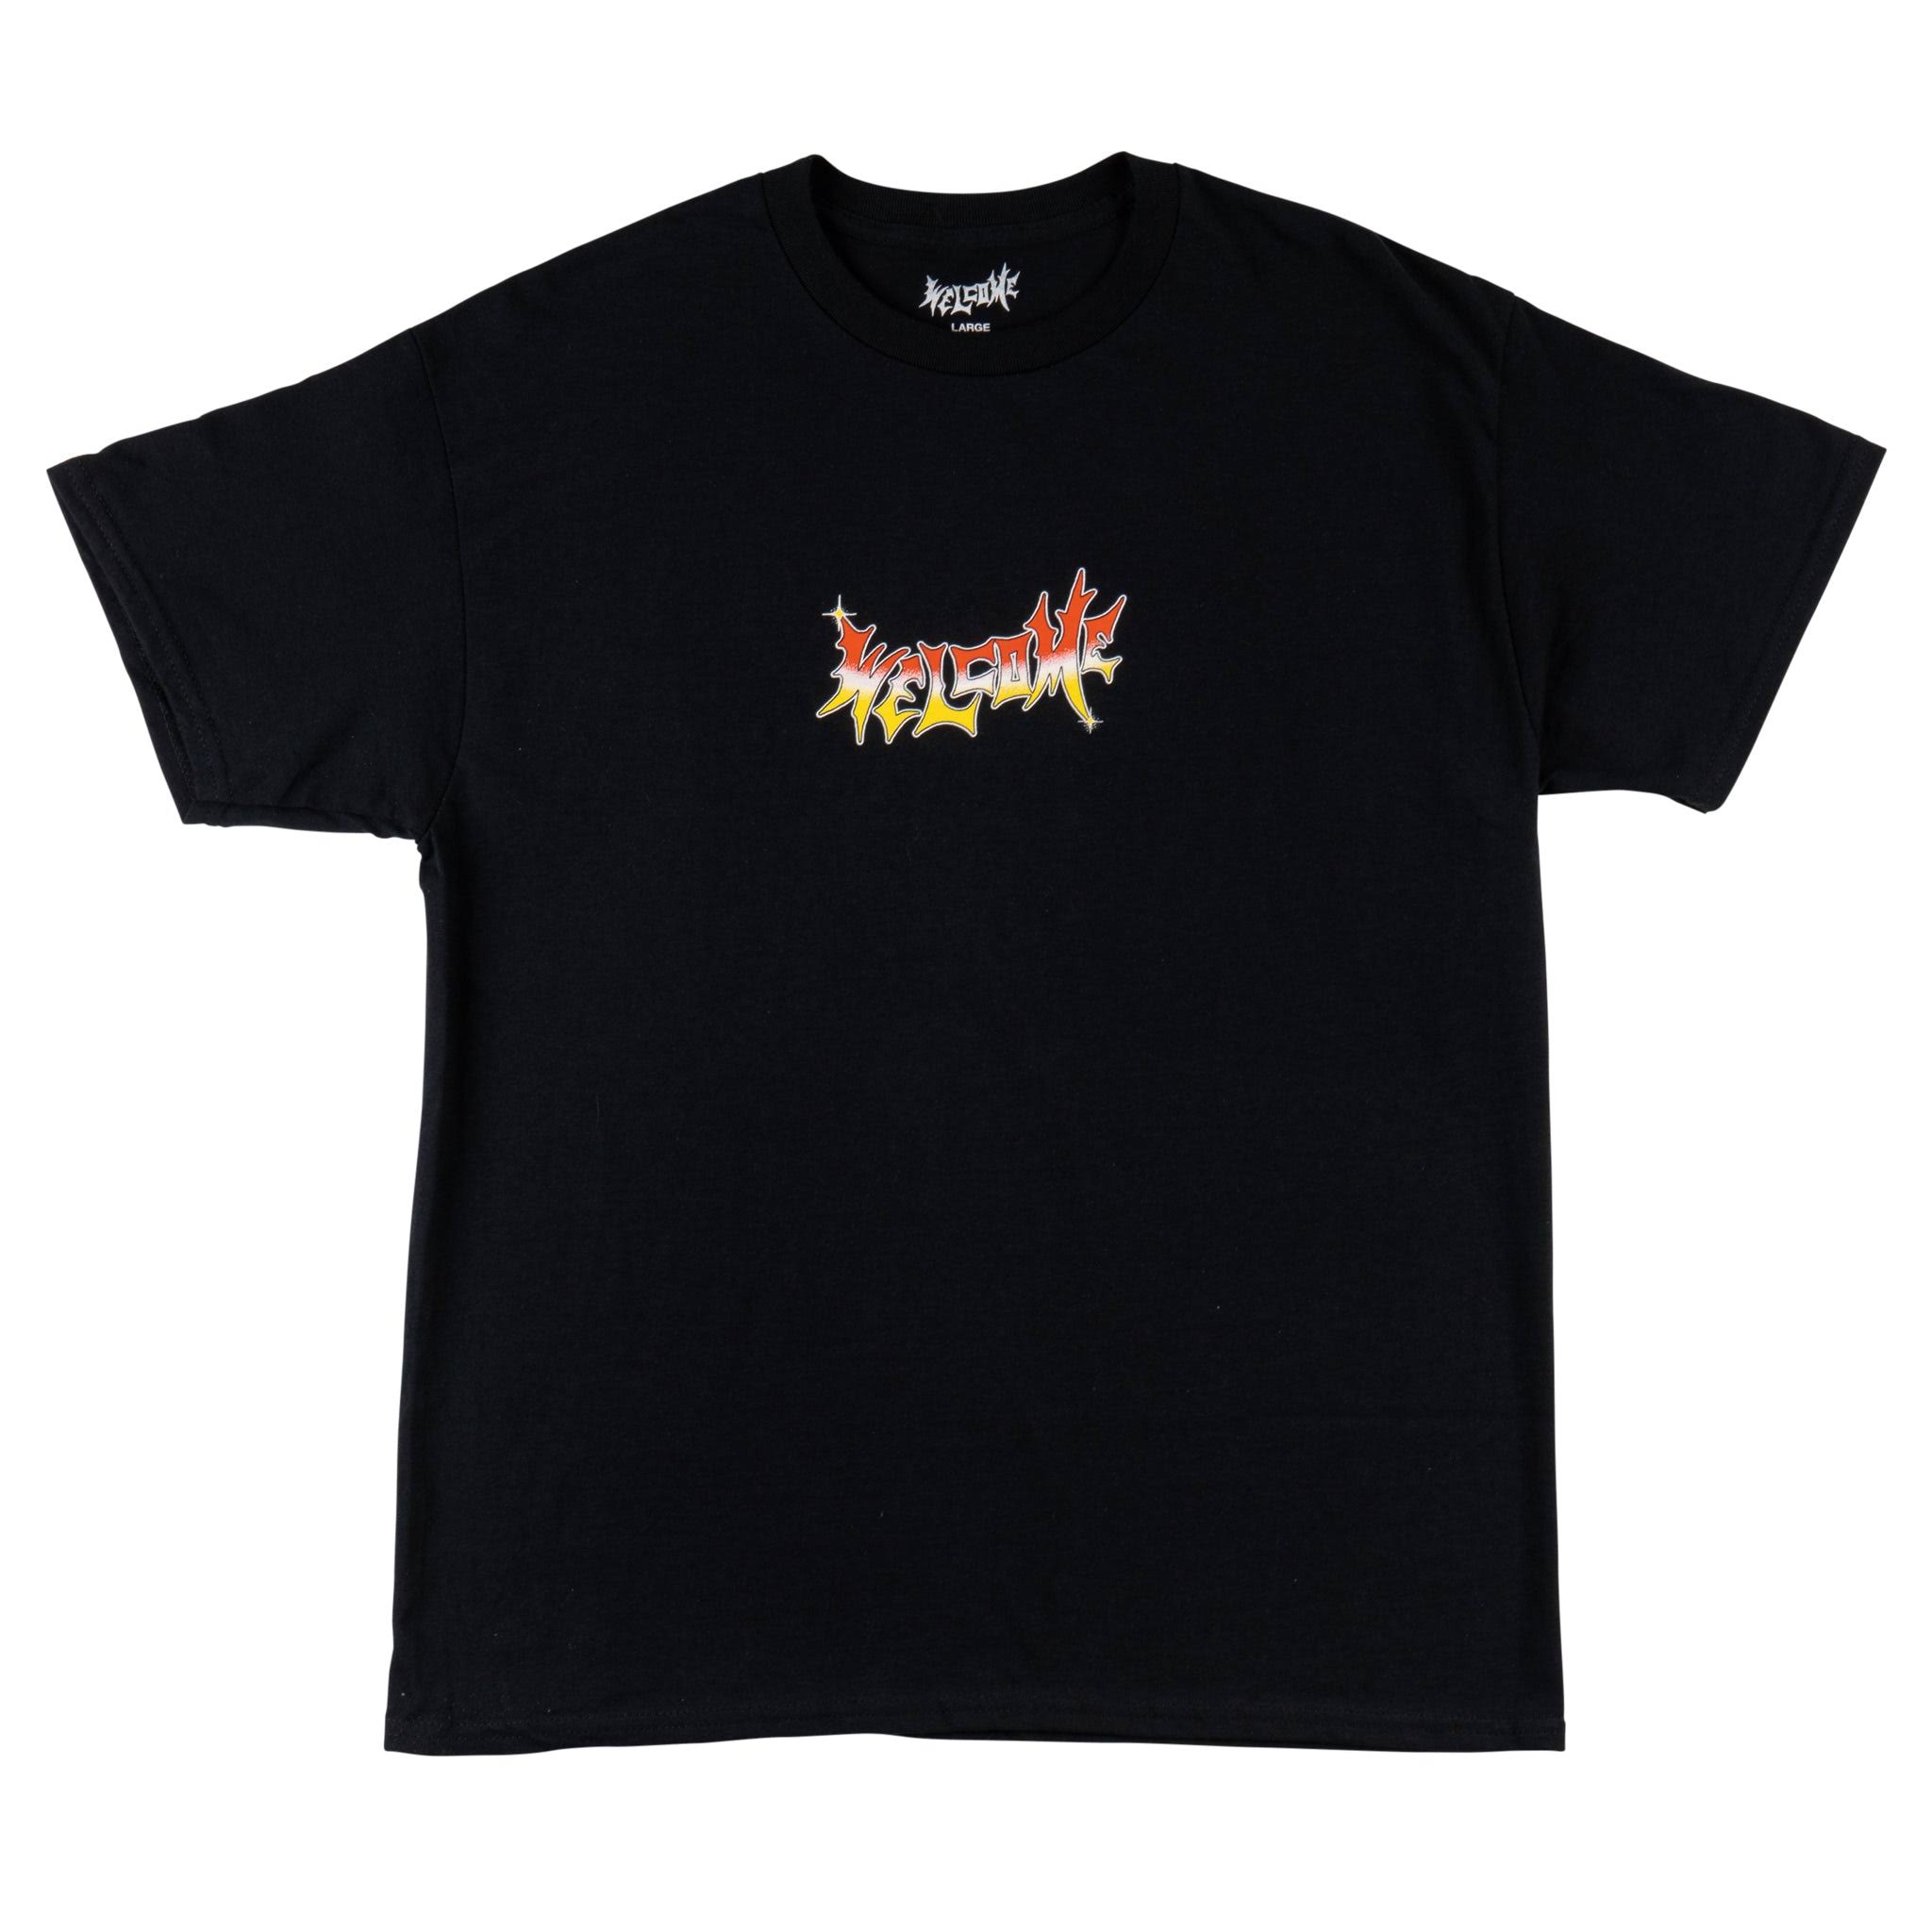 Welcome Skateboards | Vamp Shine Tee - Black/Red/Yellow Small